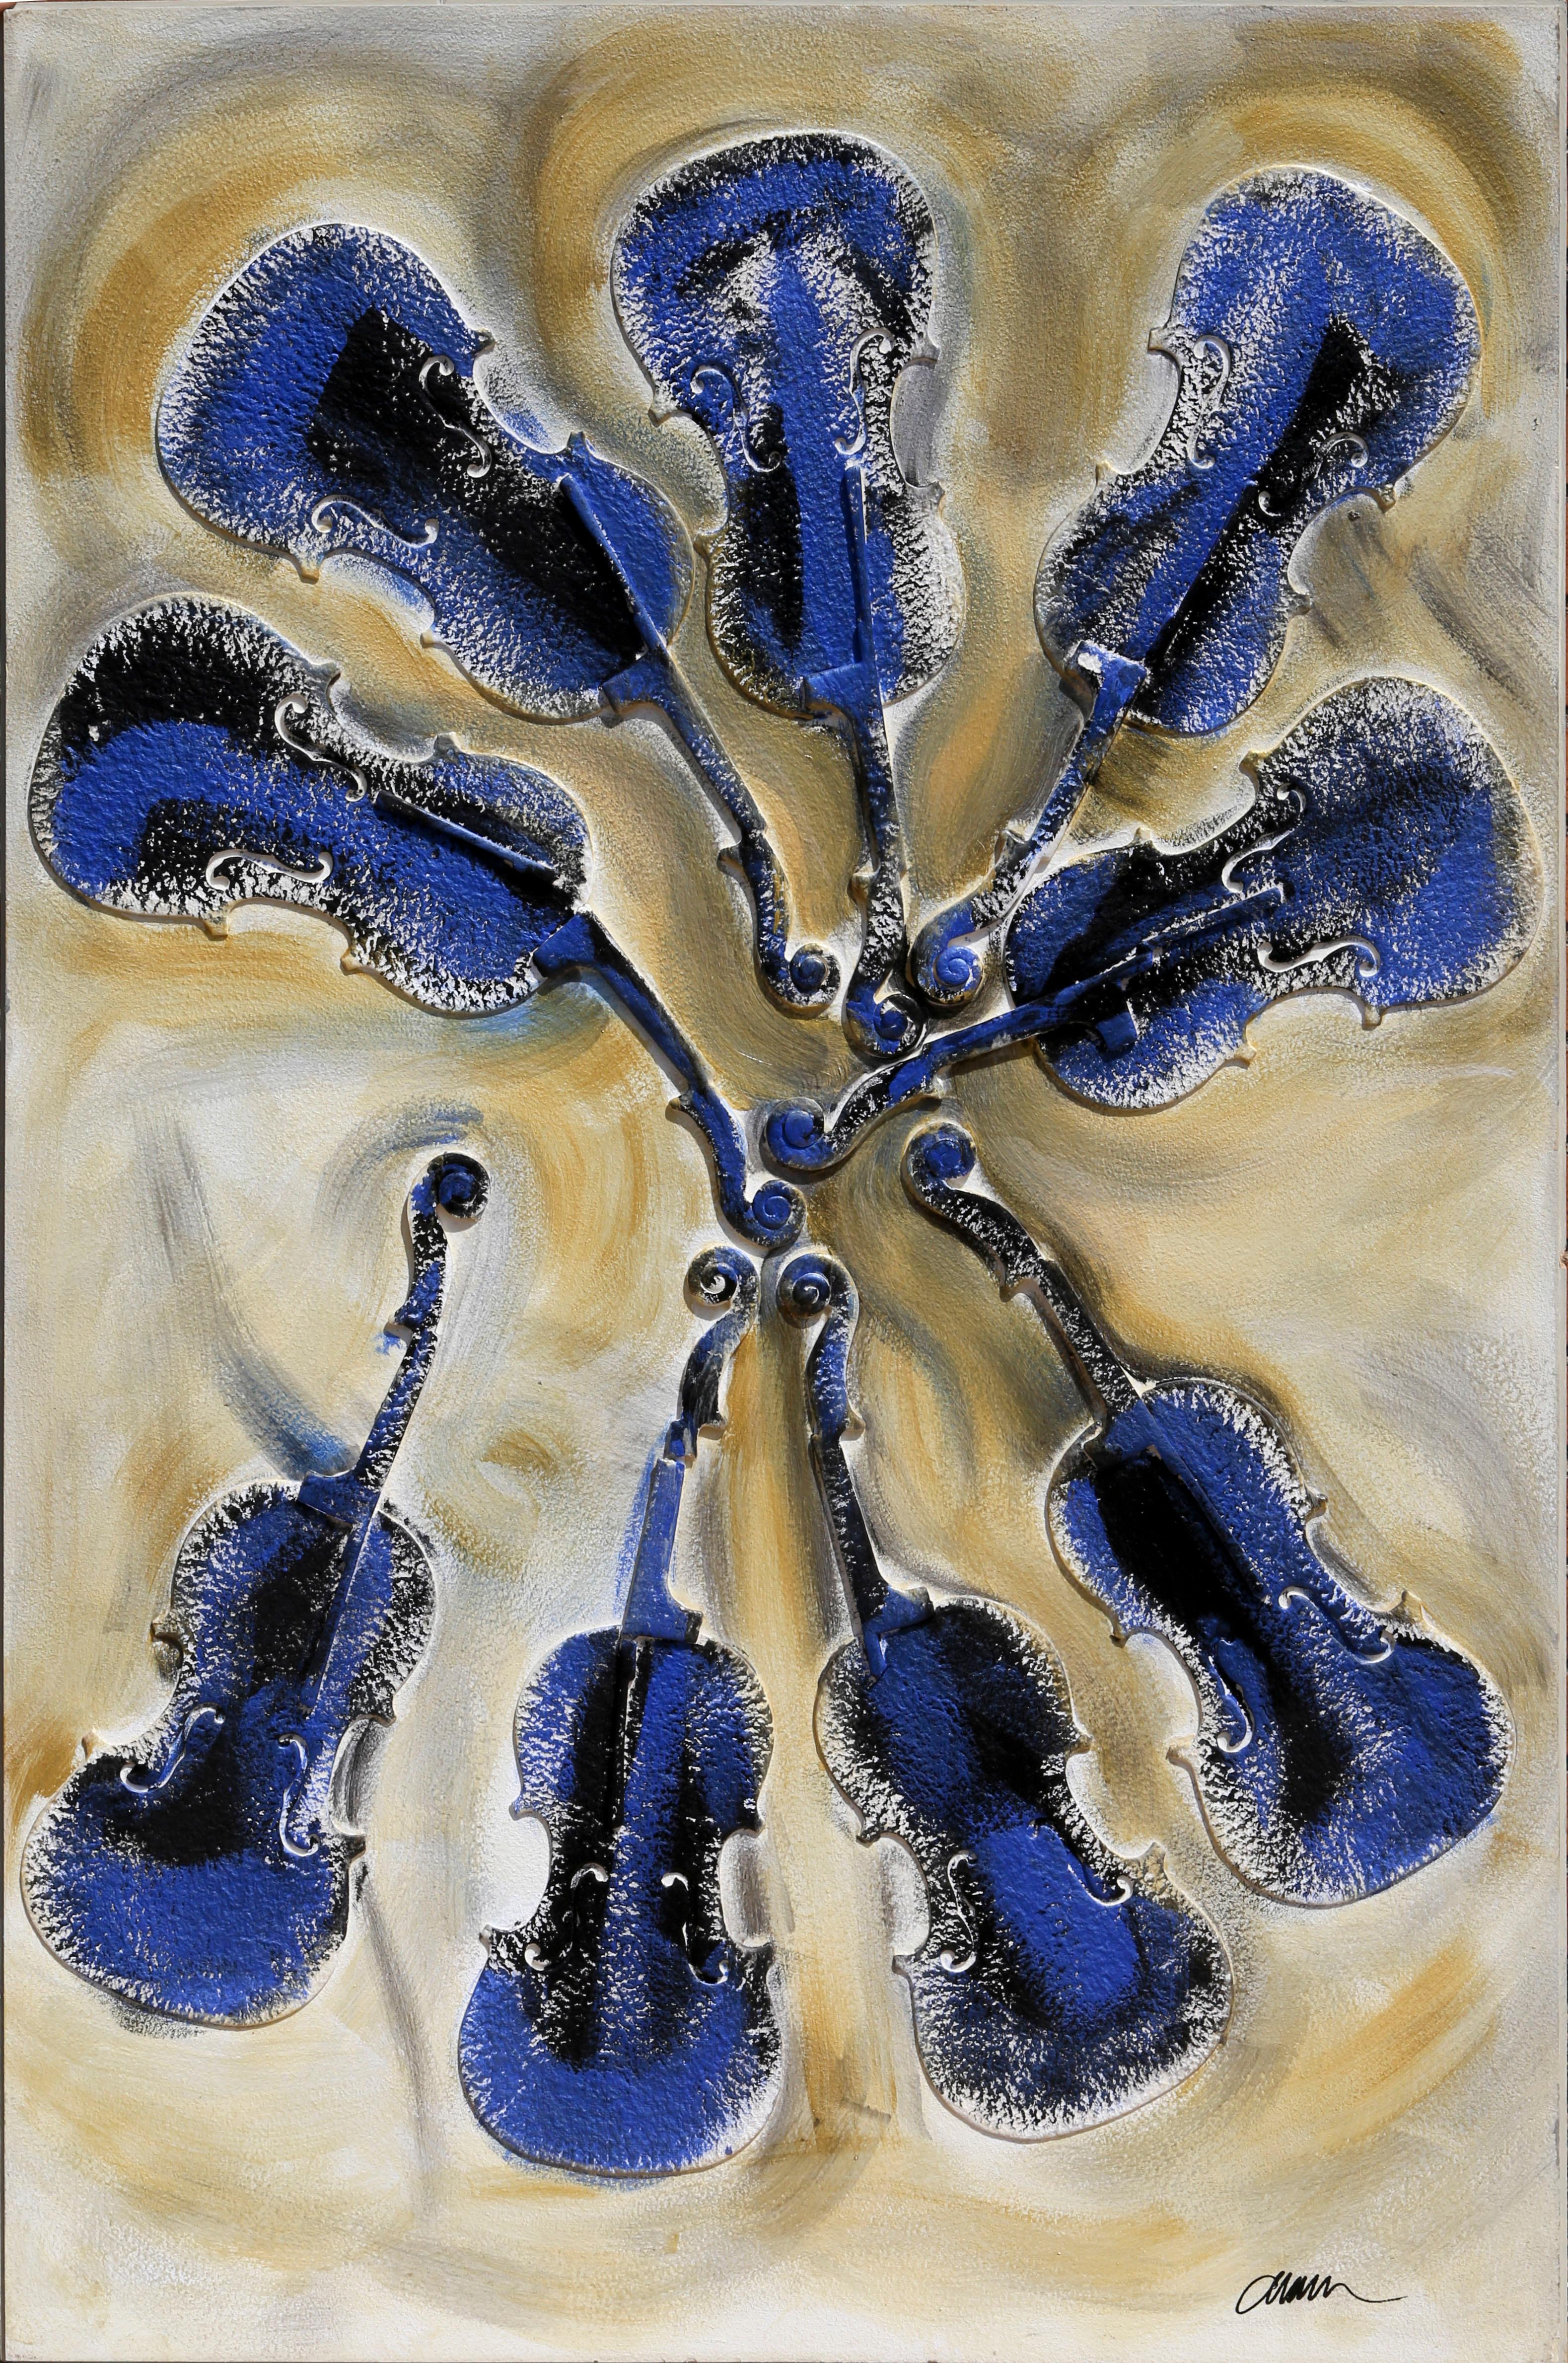 Arman loved depicting the violin in his work more than any other subject. In this colossal piece, the artist actually took the necks and scrolls from several violins to use as material. The composition is signed and numbered by the artist.

Embedded